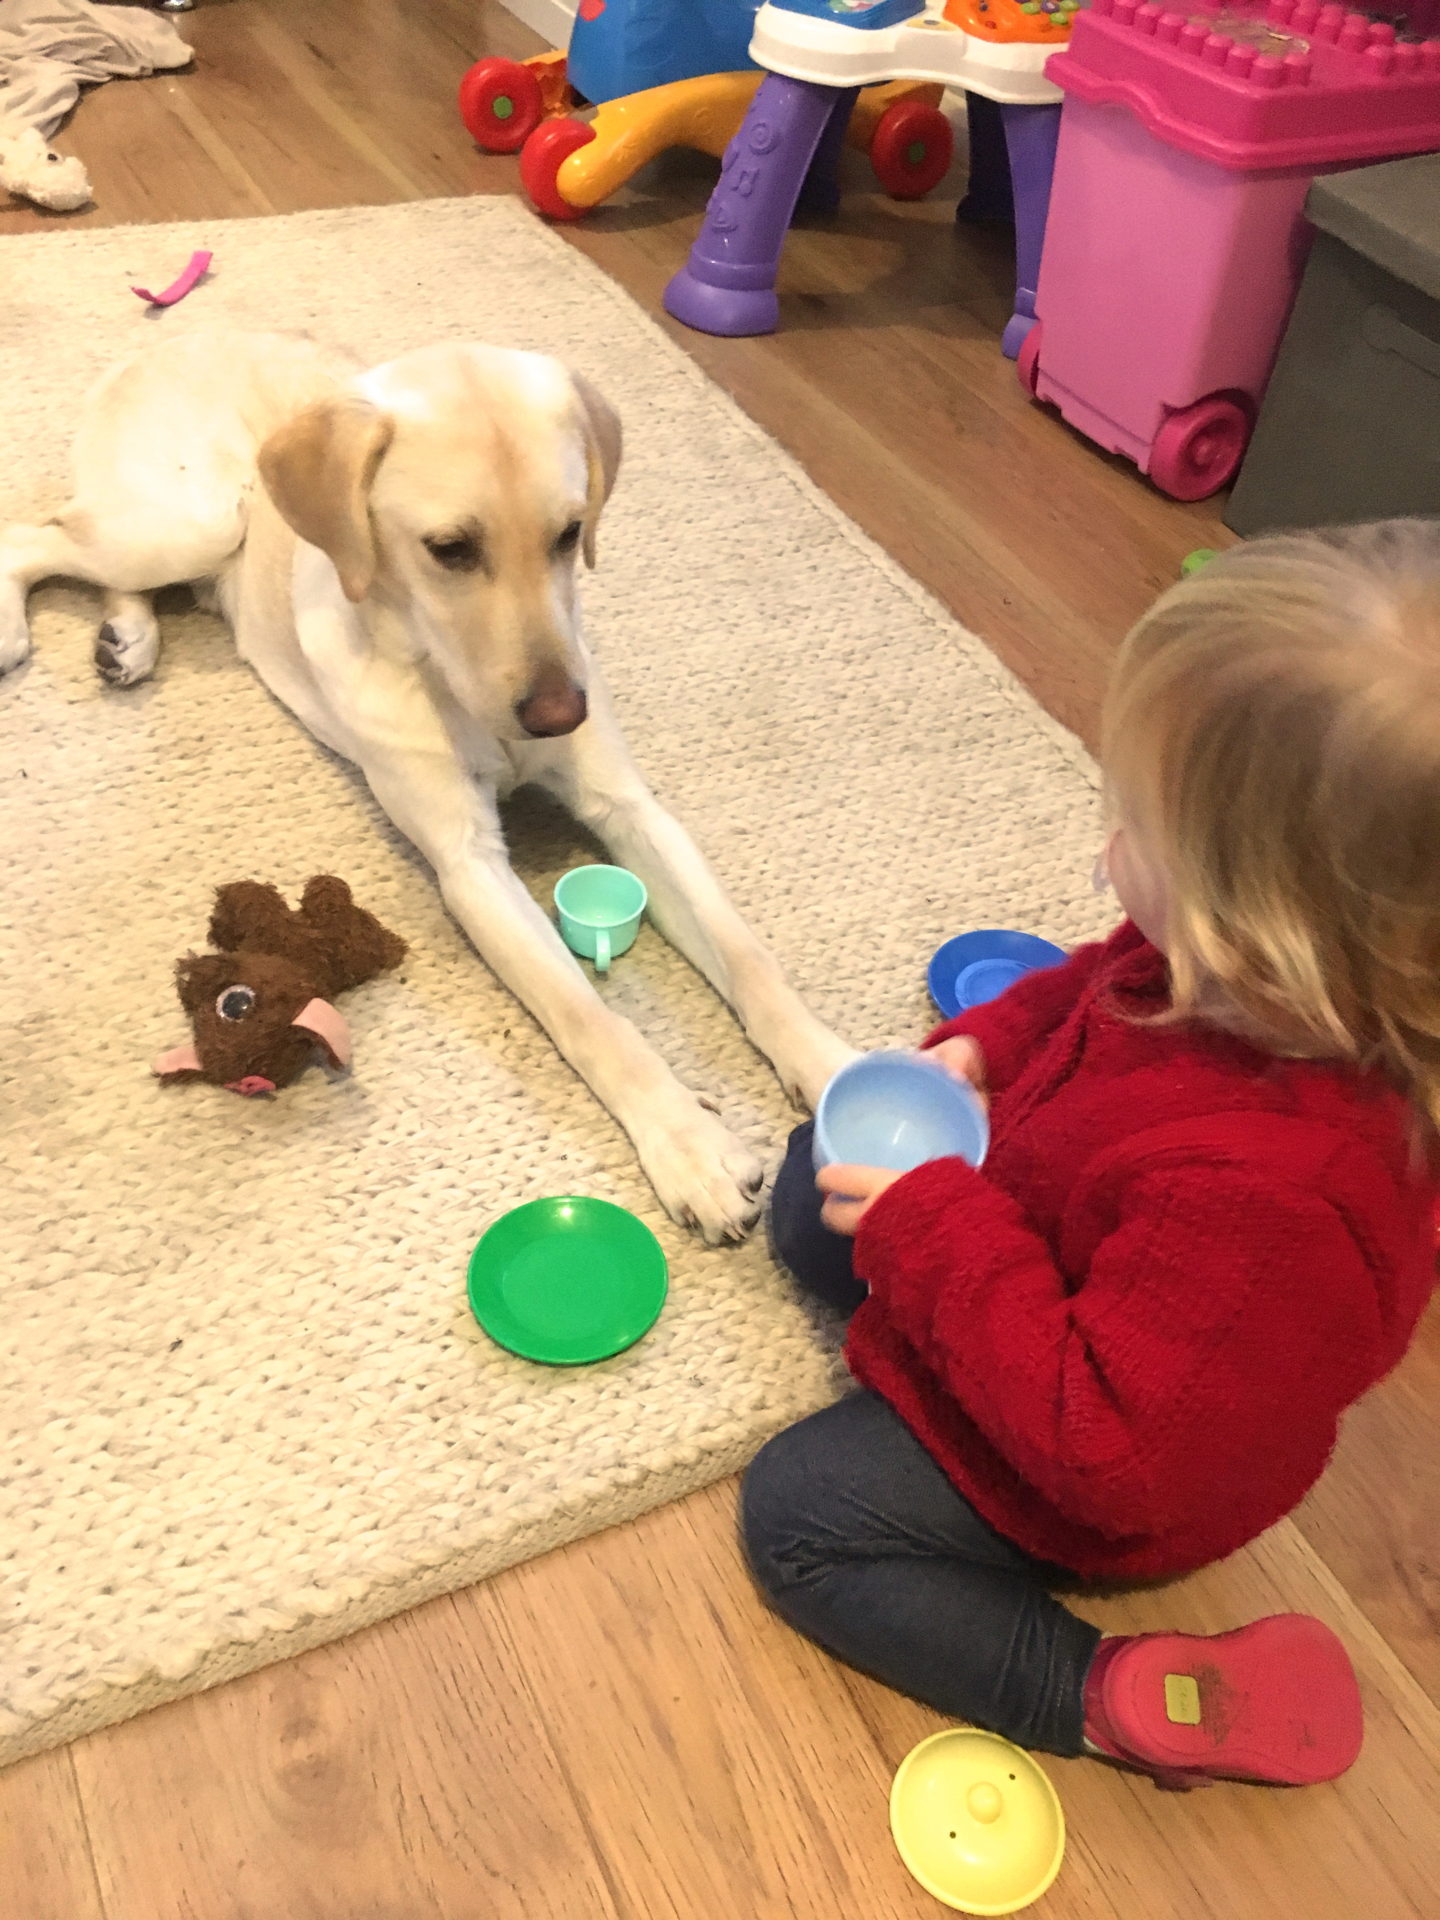 22 months old girl playing tea parties with a yellow labrador